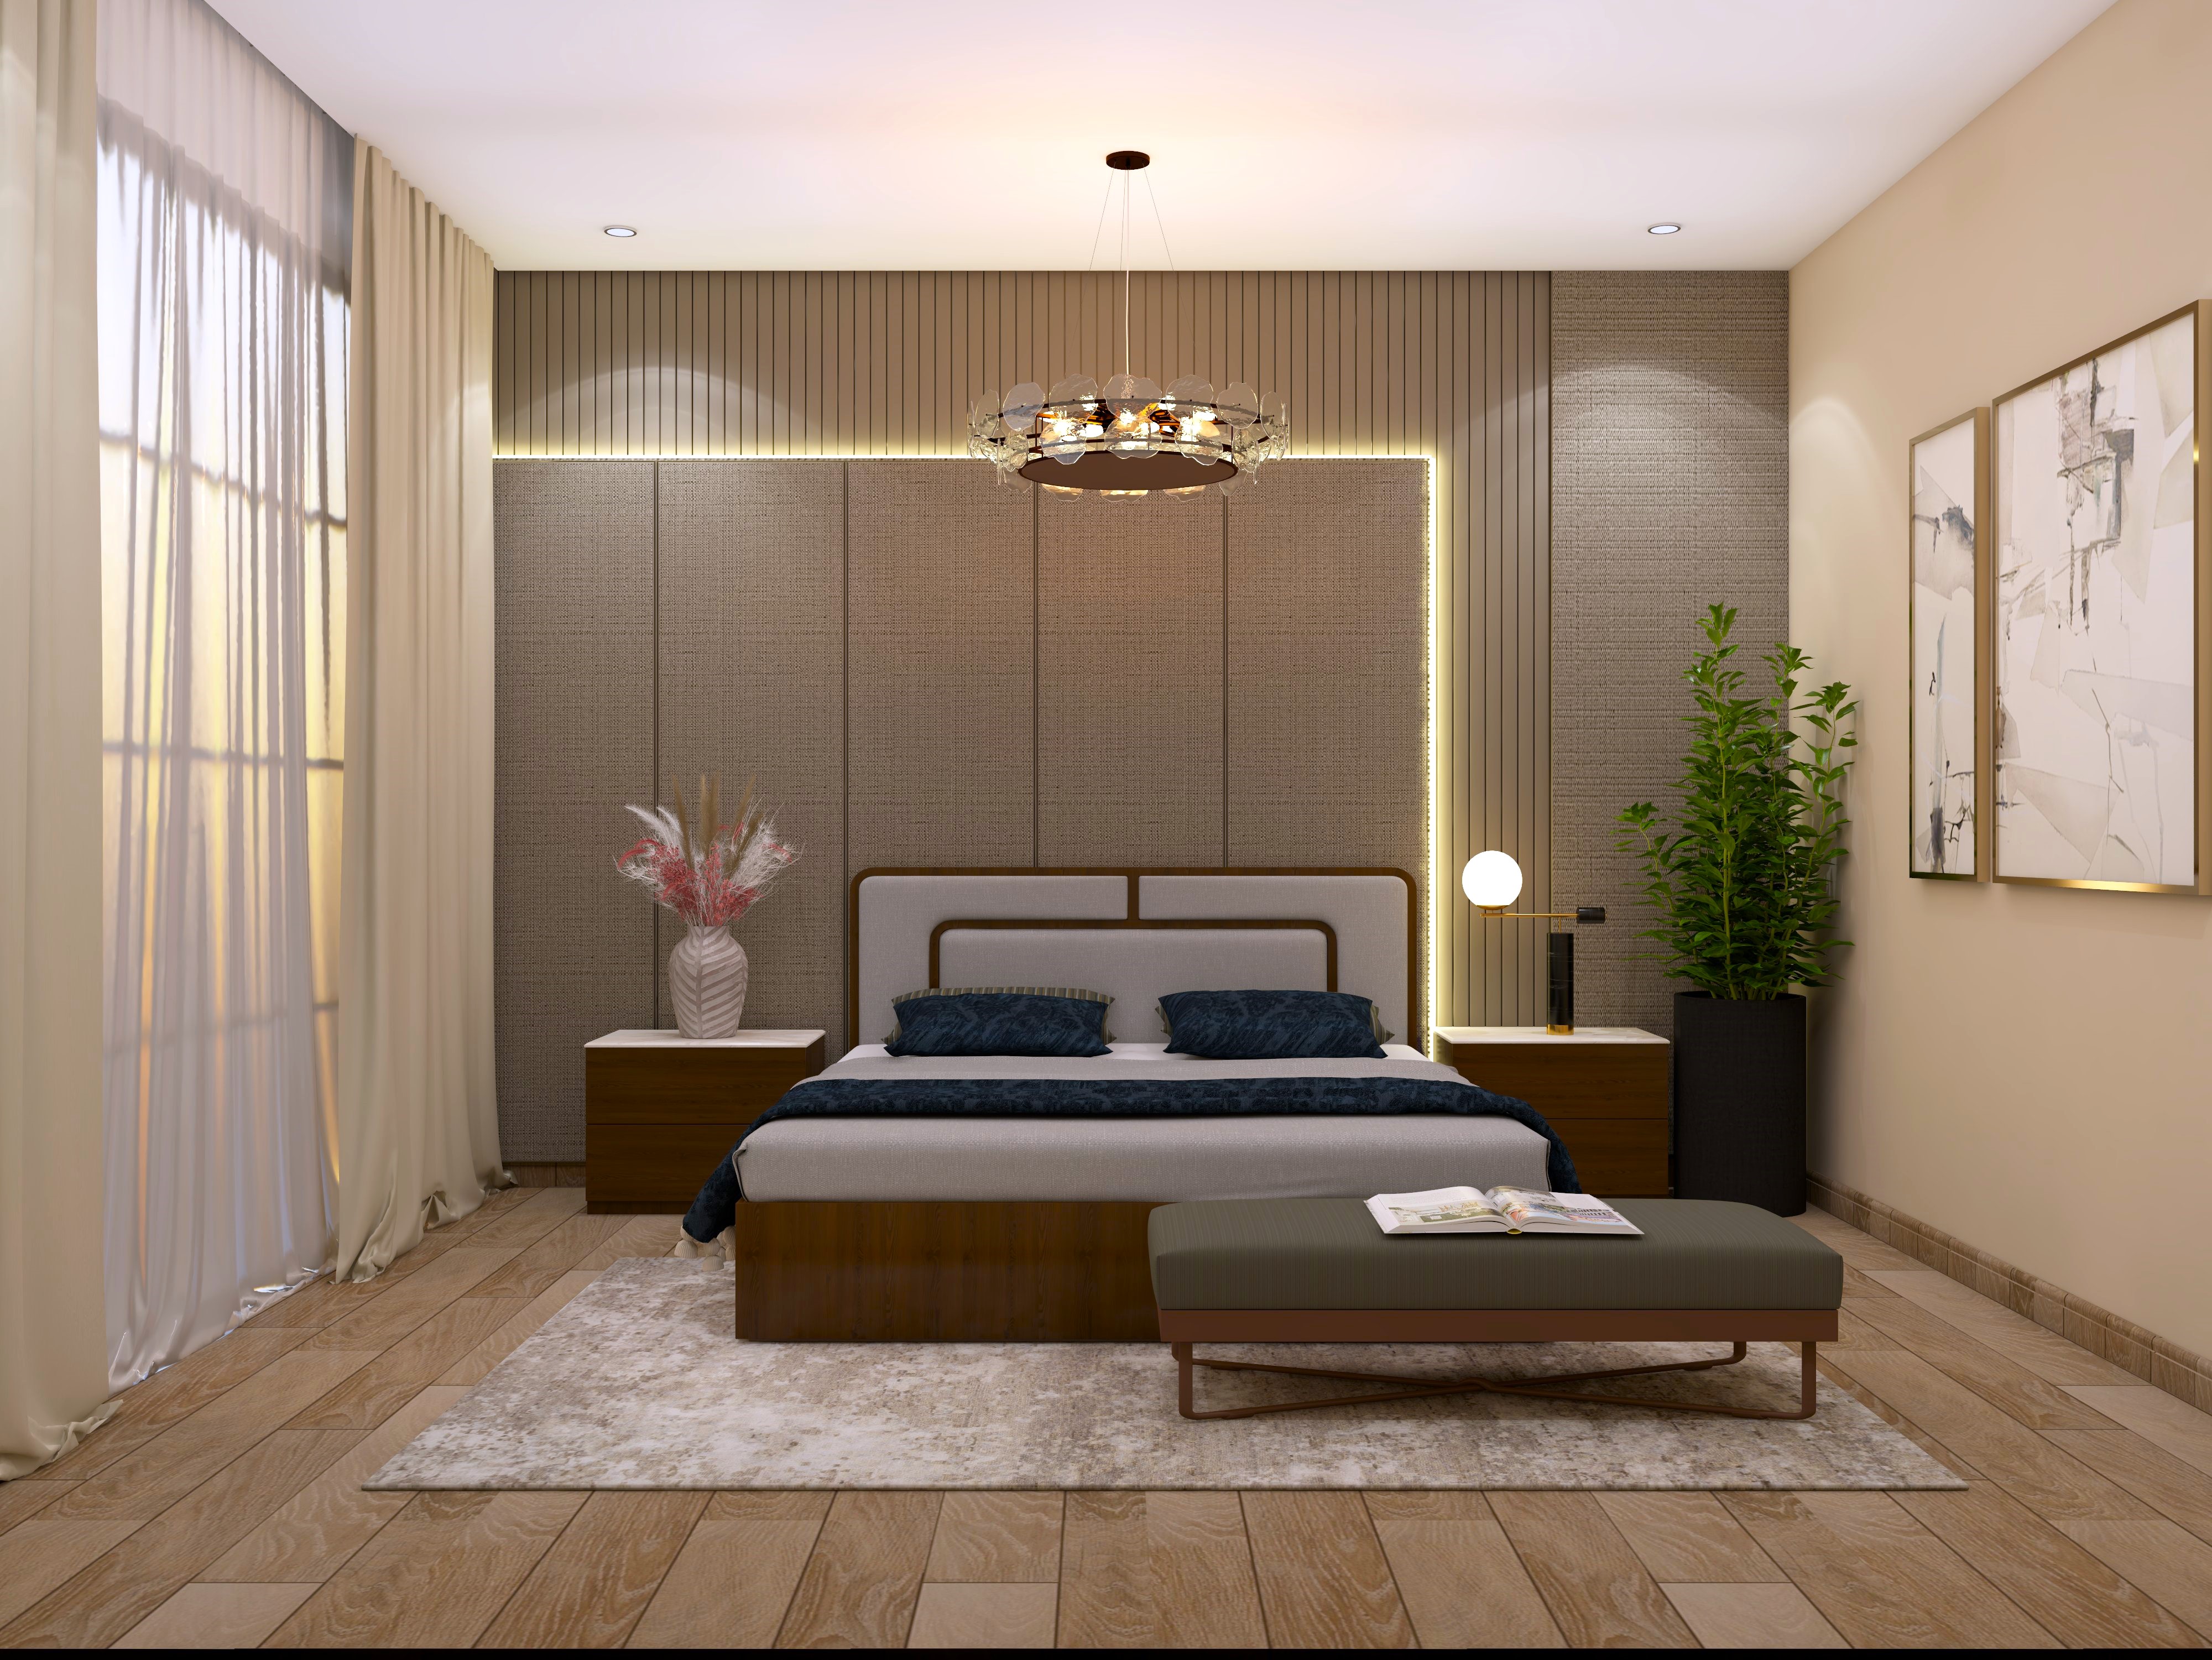 Master bedroom with grey upholstered bed and brown textured wall paneling - Beautiful Homes